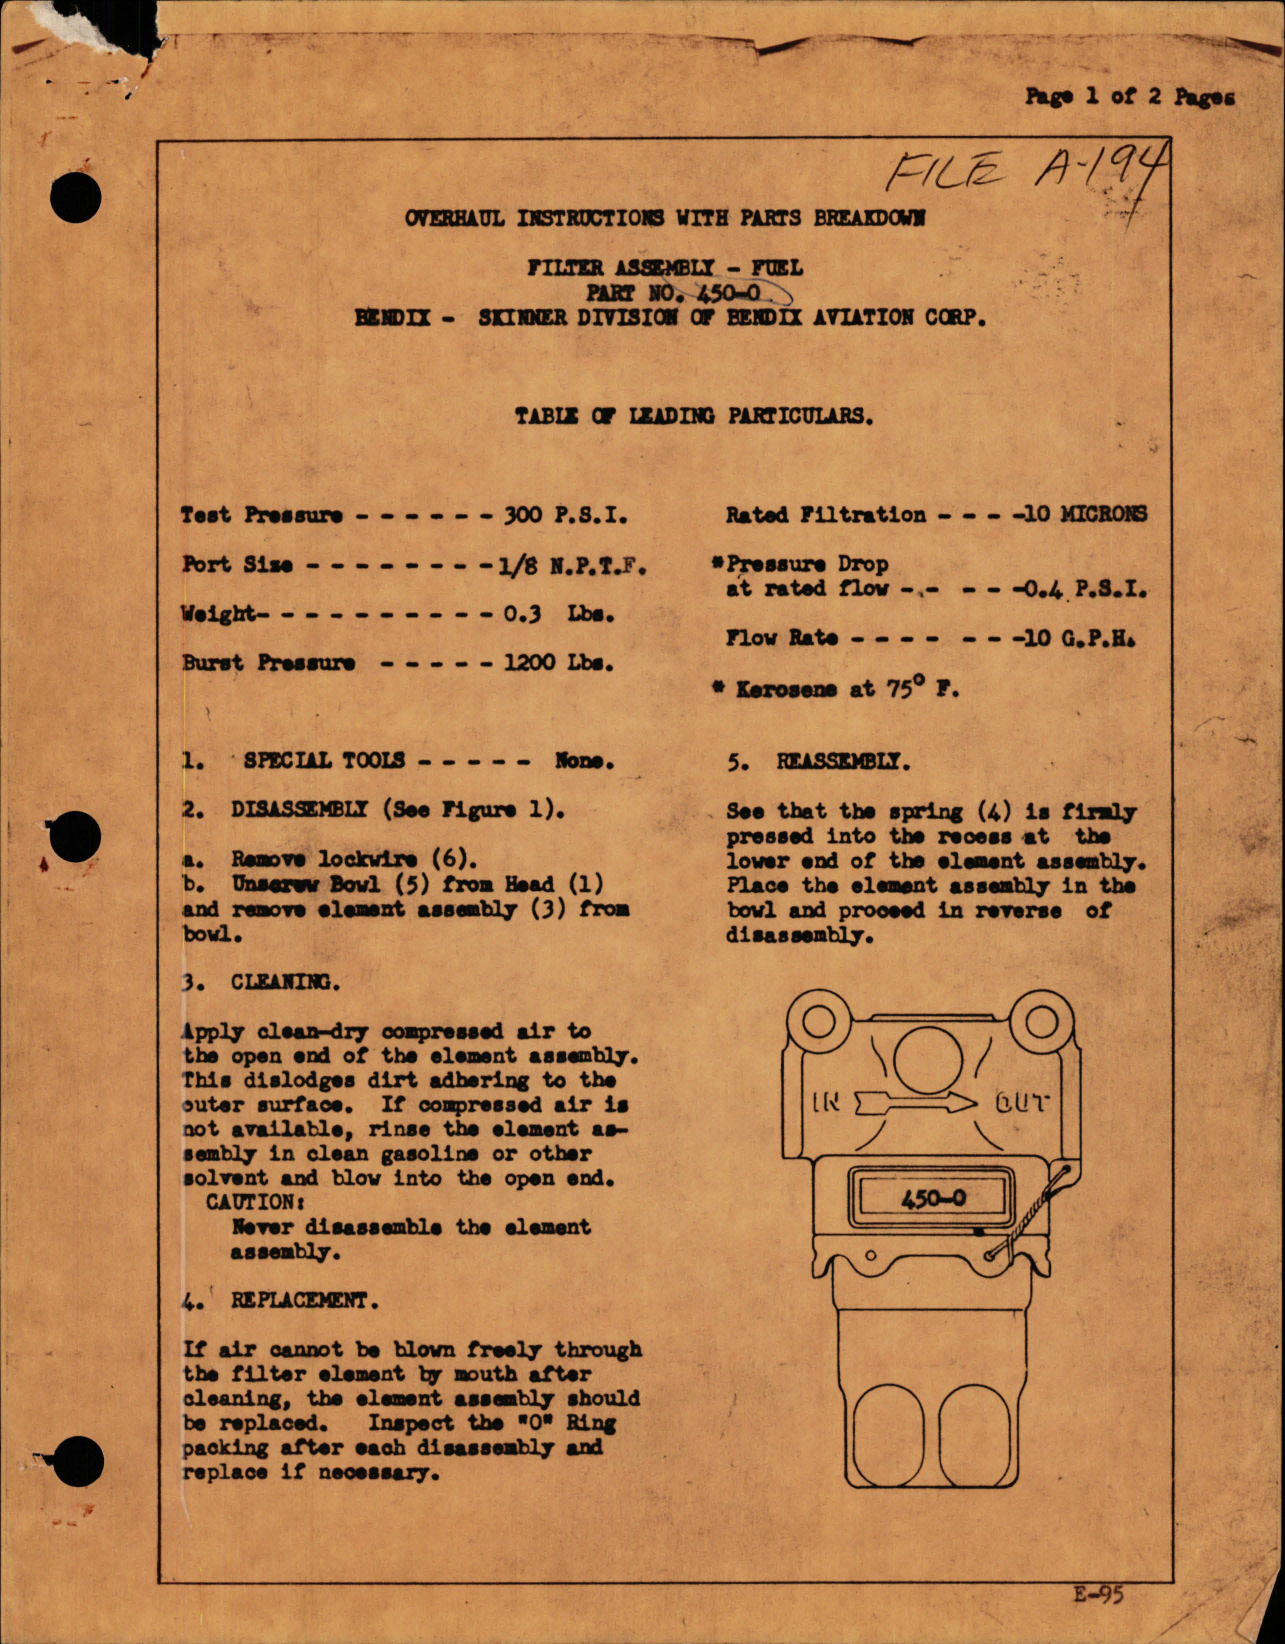 Sample page 1 from AirCorps Library document: Overhaul Instructions with Parts Breakdown for Fuel Filter Assembly - Part 450-0